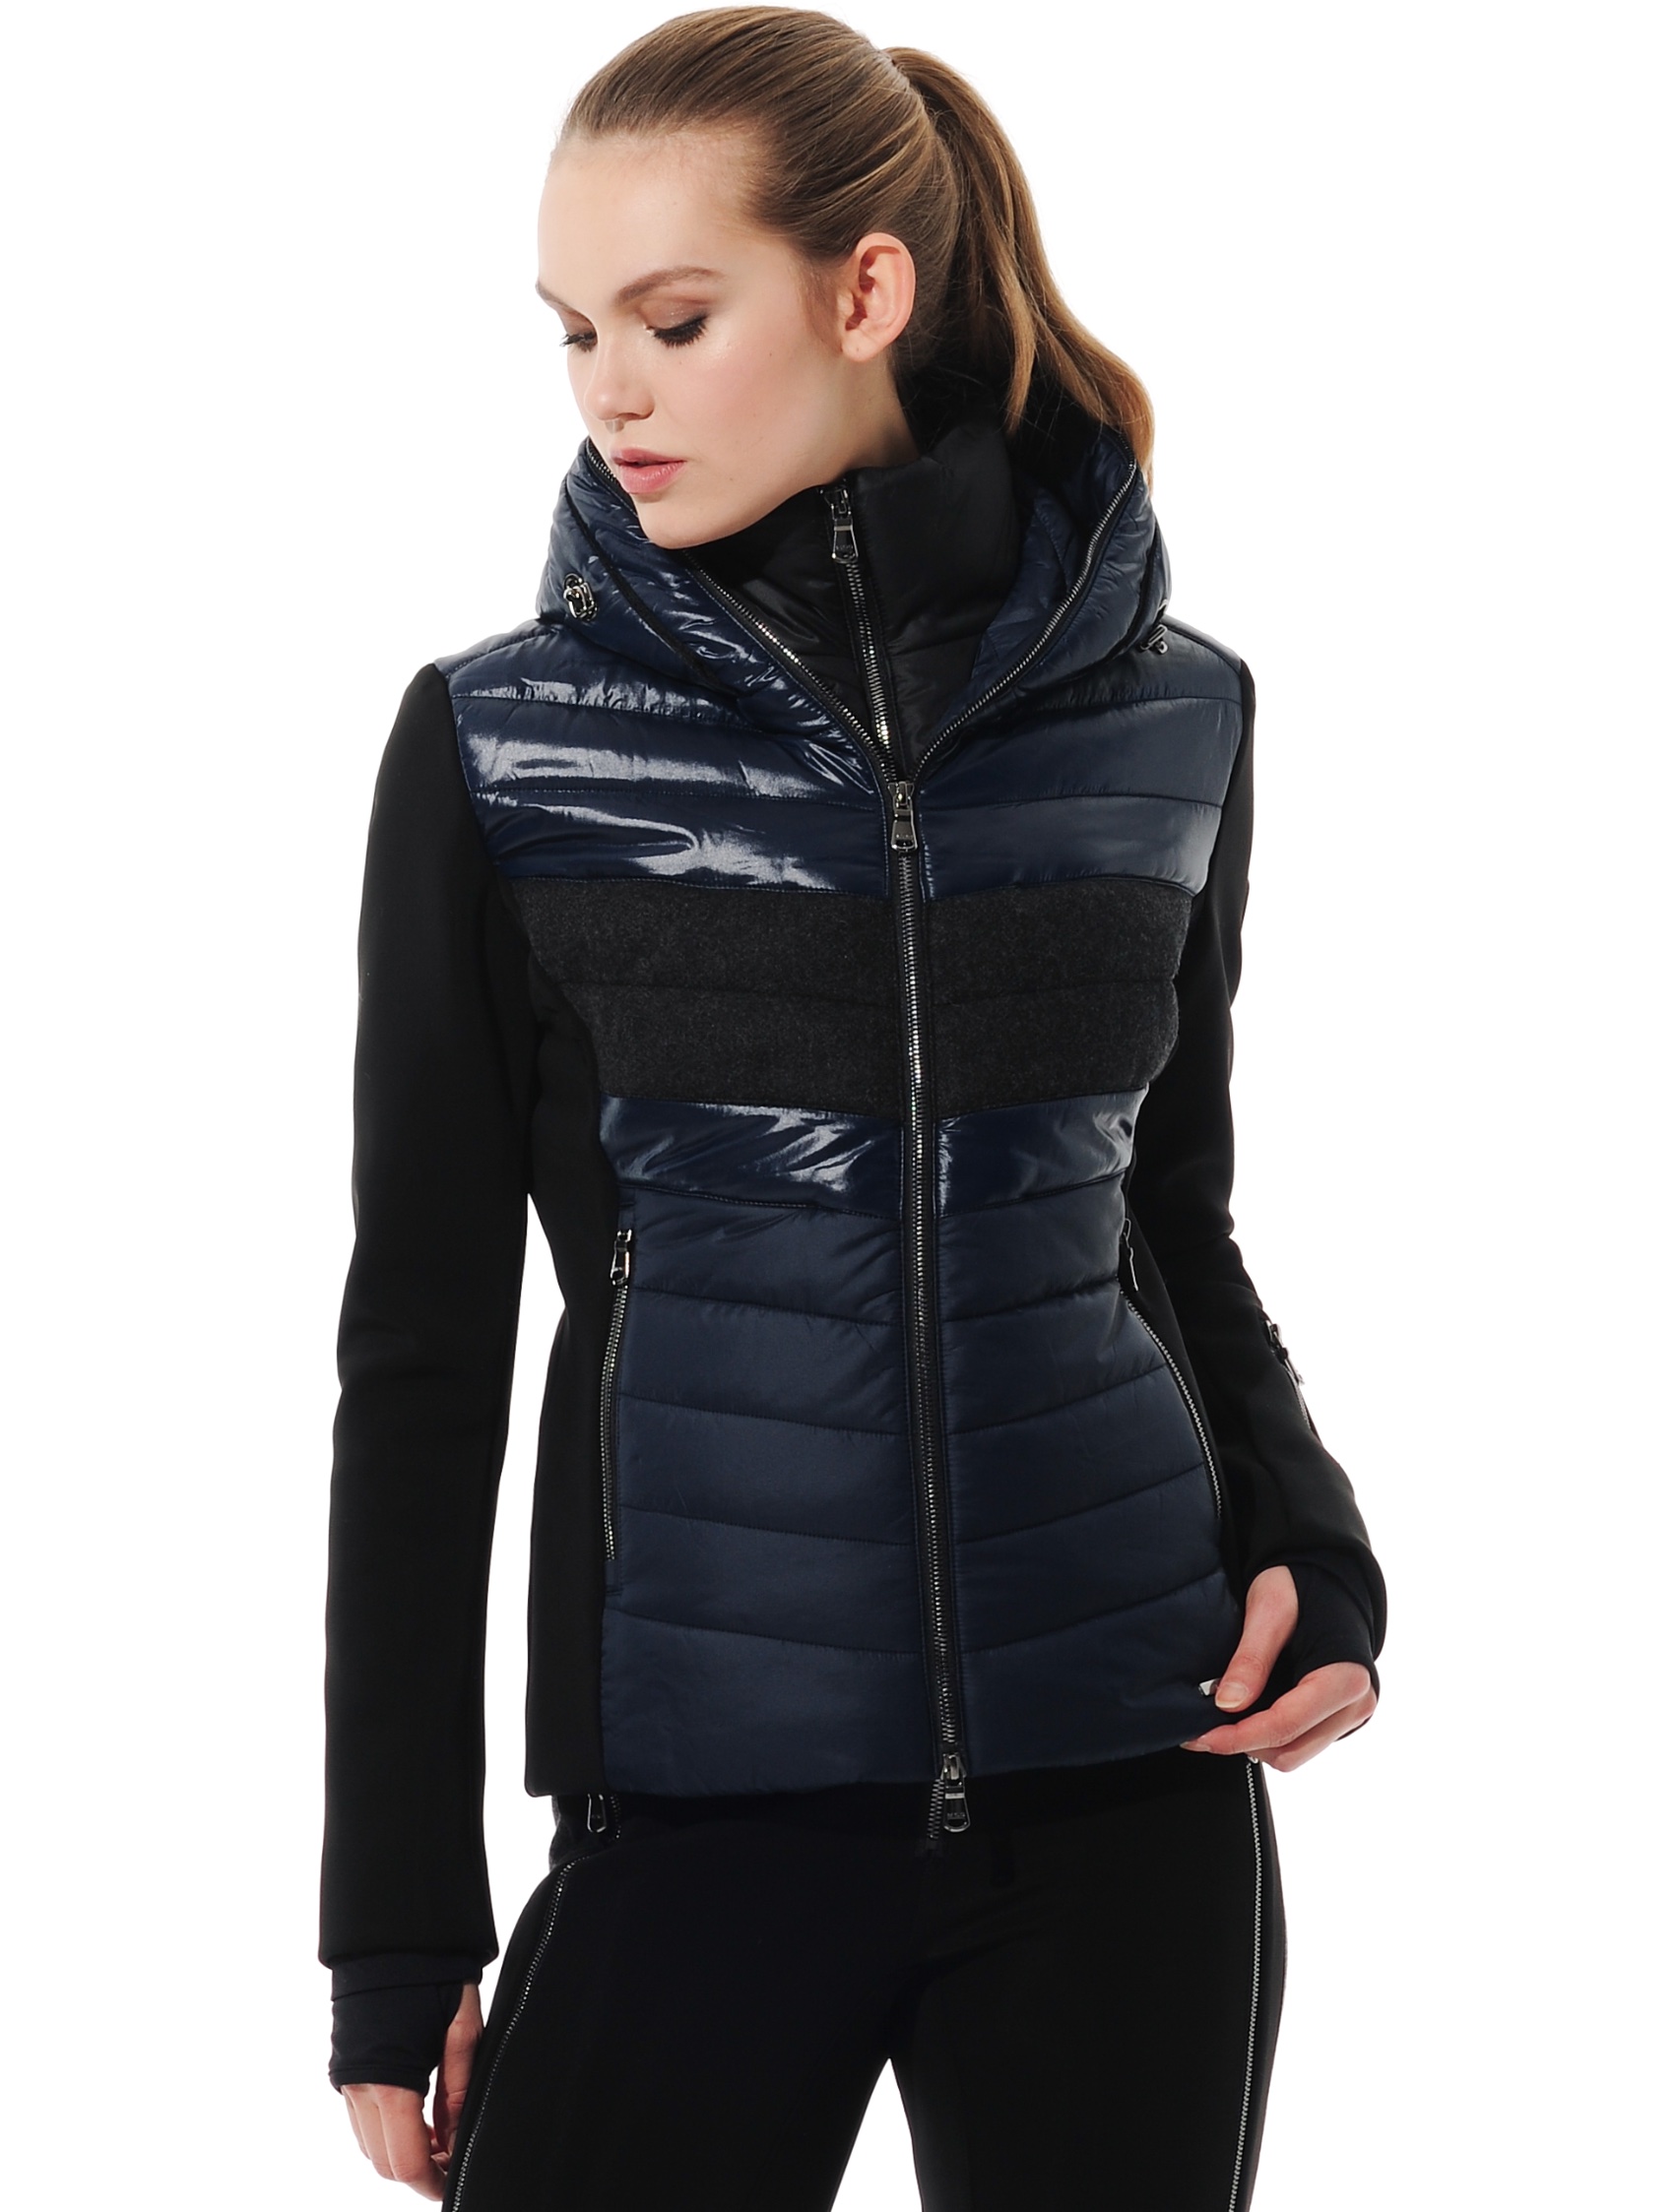 ski jacket with 4way stretch sleeves and side panels navy/black 